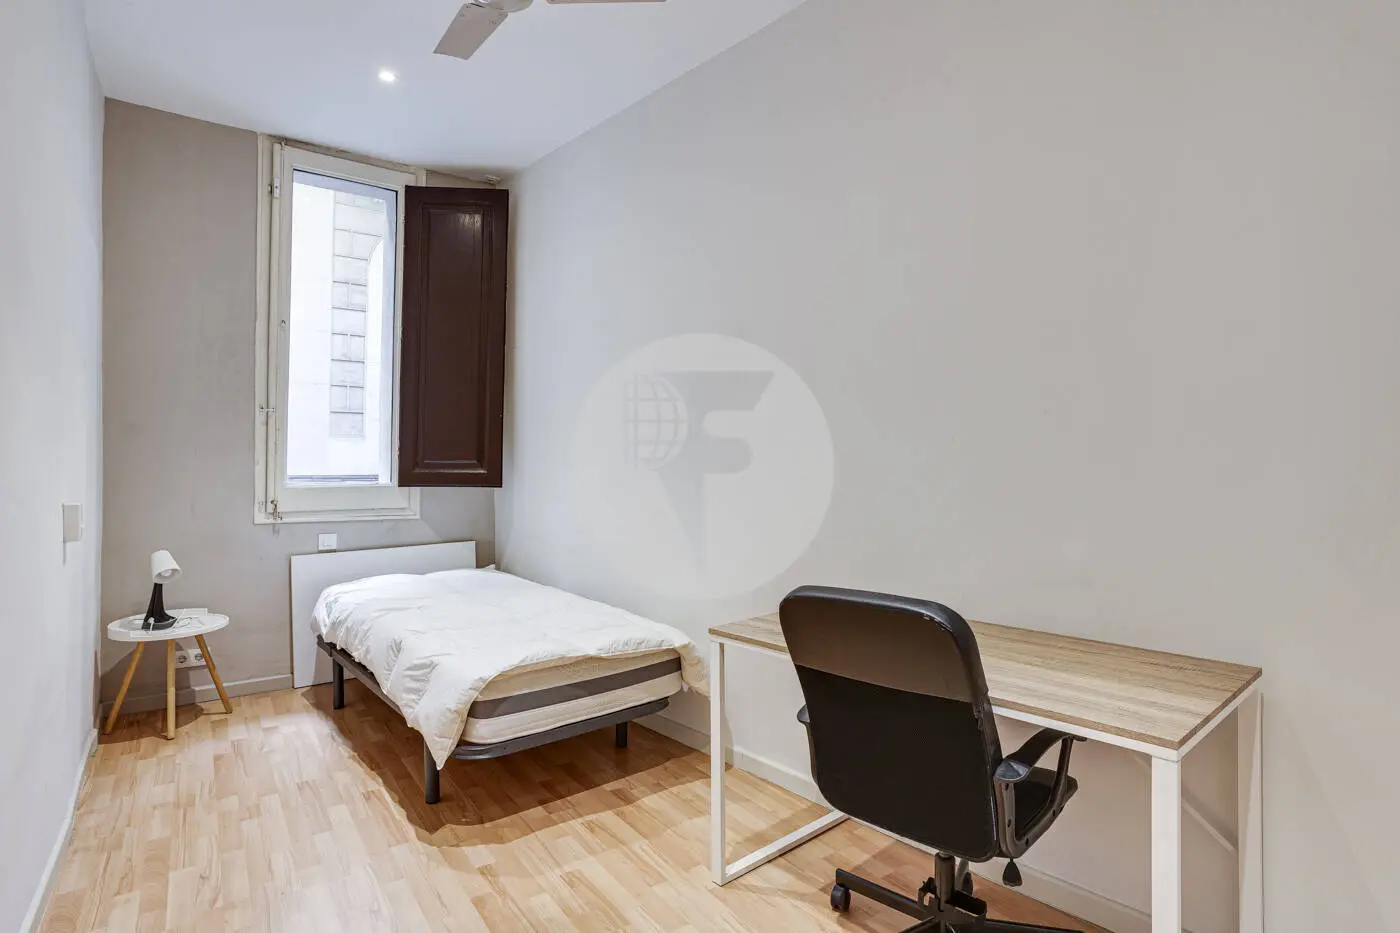 Magnificent apartment for sale next to Pl Universitat of 114m2 according to the land registry, located on Tallers Street in the Ciutat Vella neighborhood of Barcelona 23